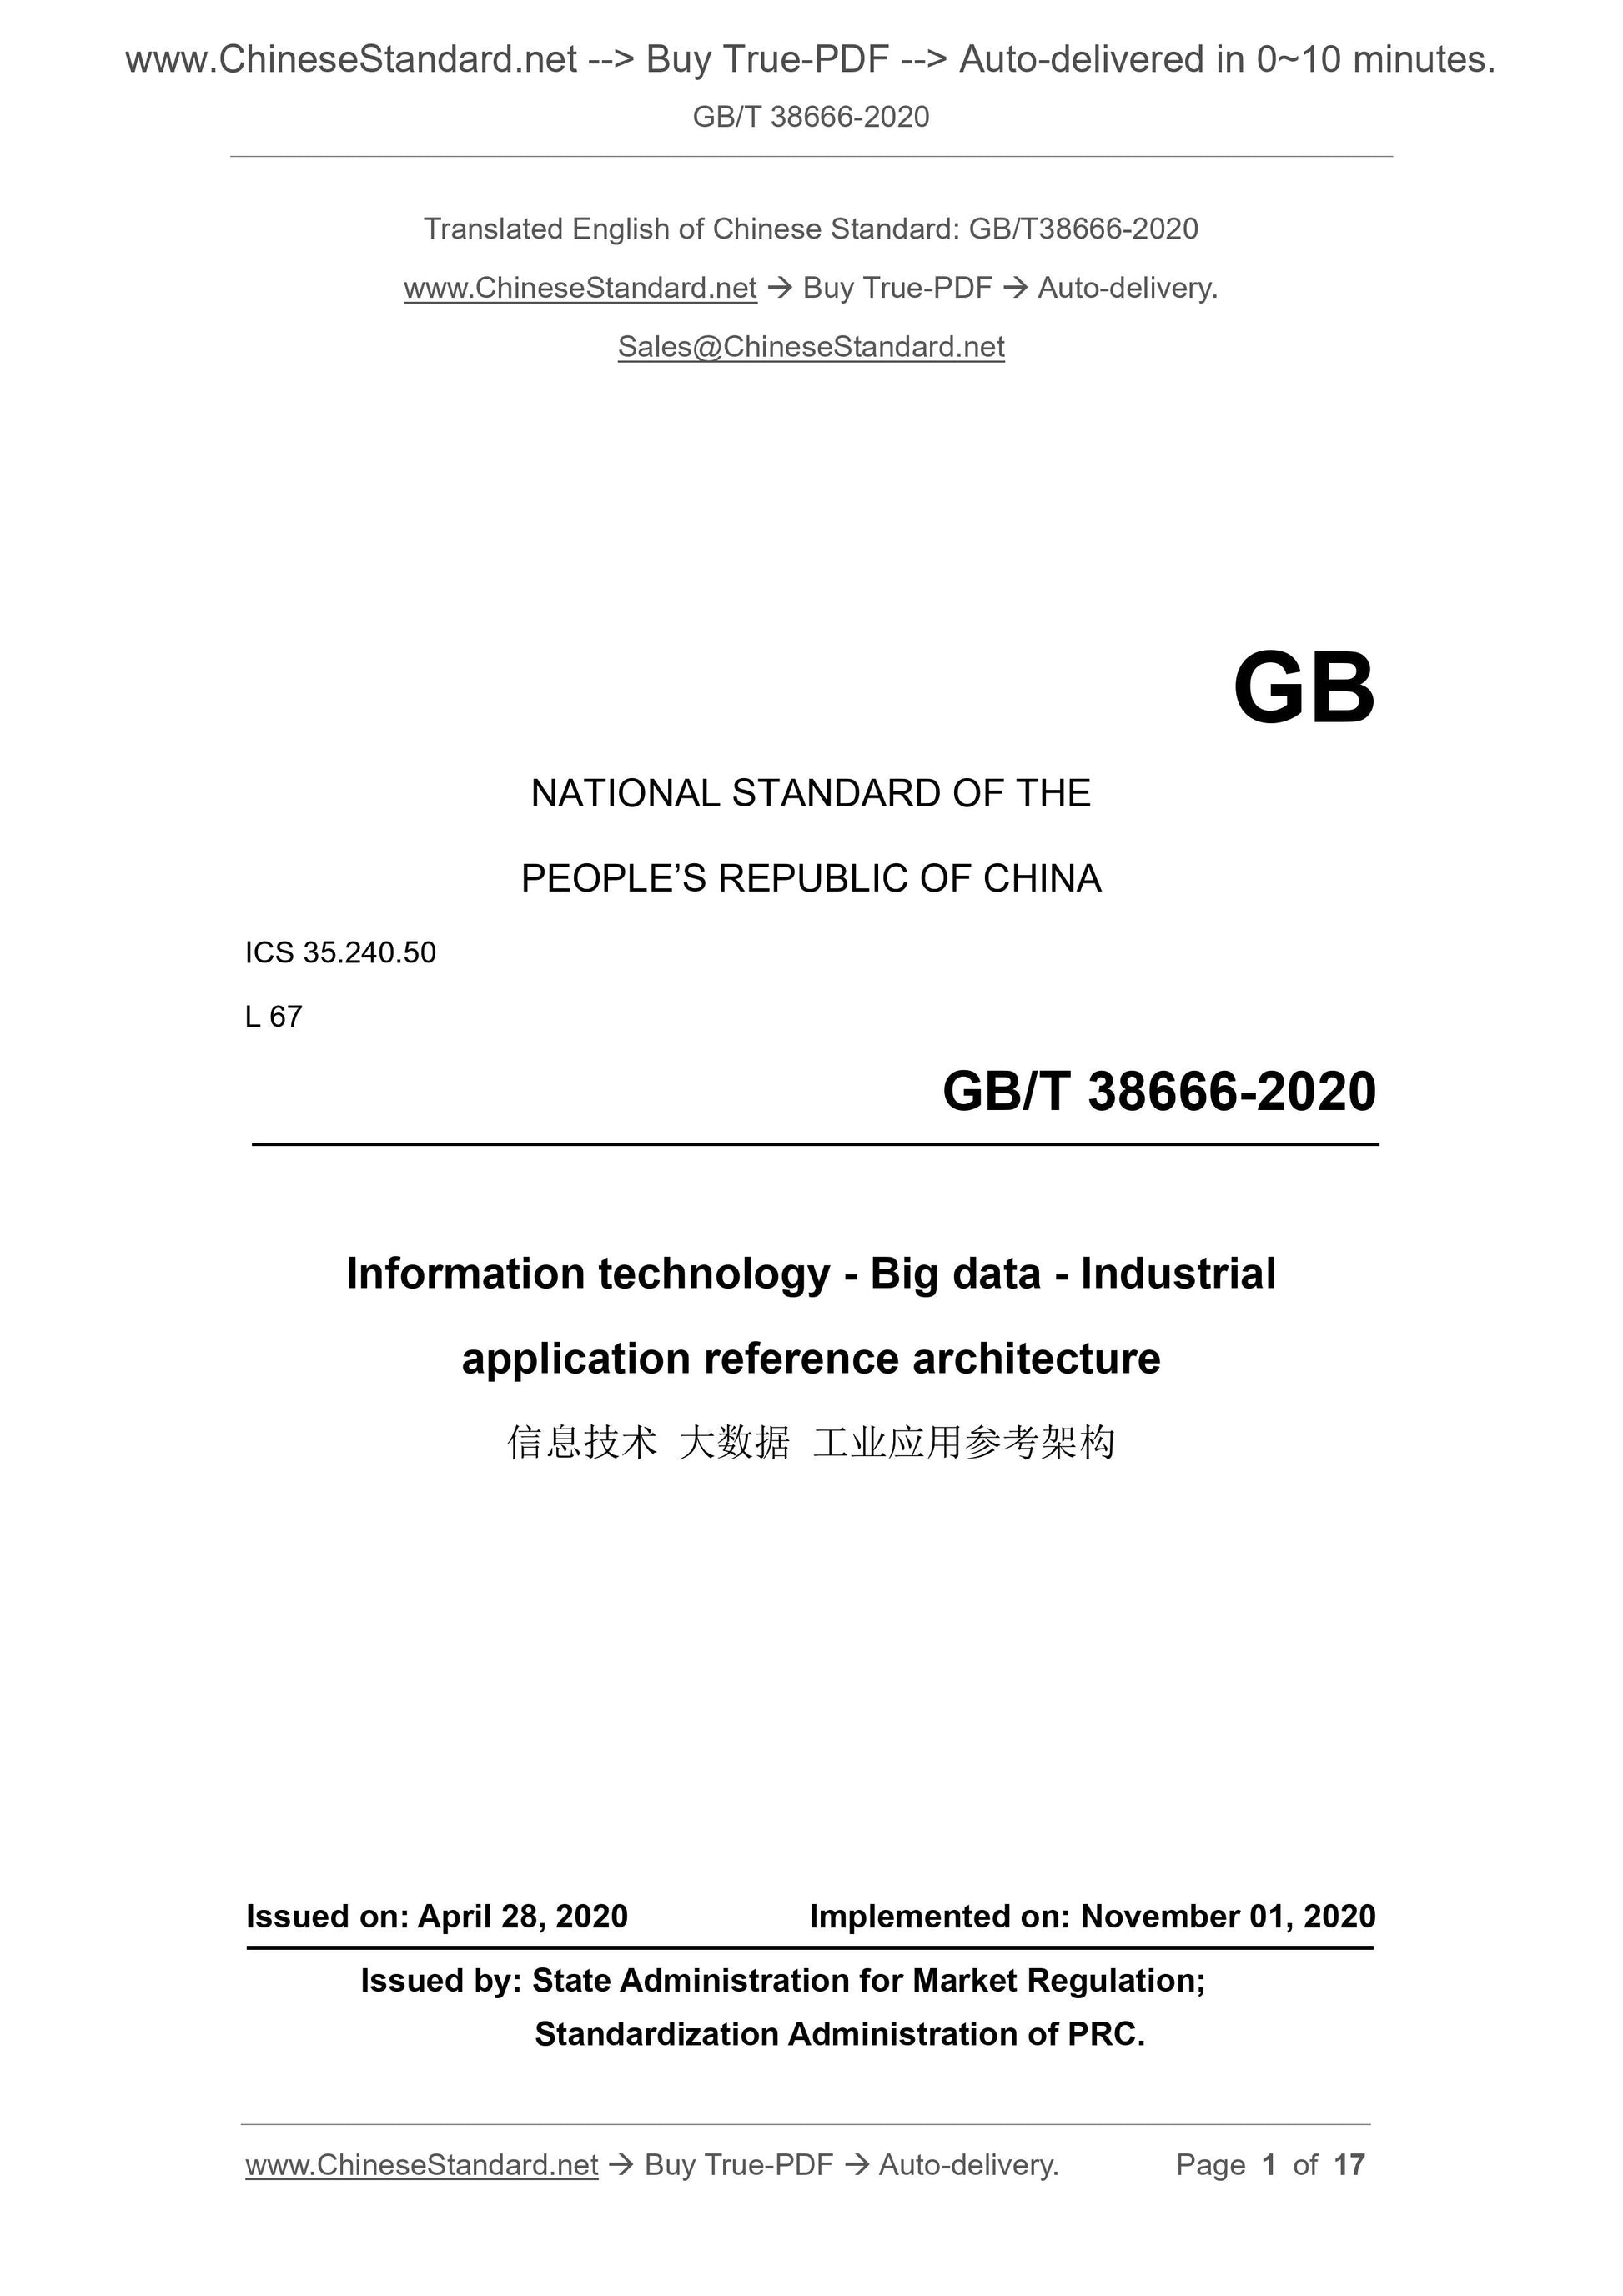 GB/T 38666-2020 Page 1